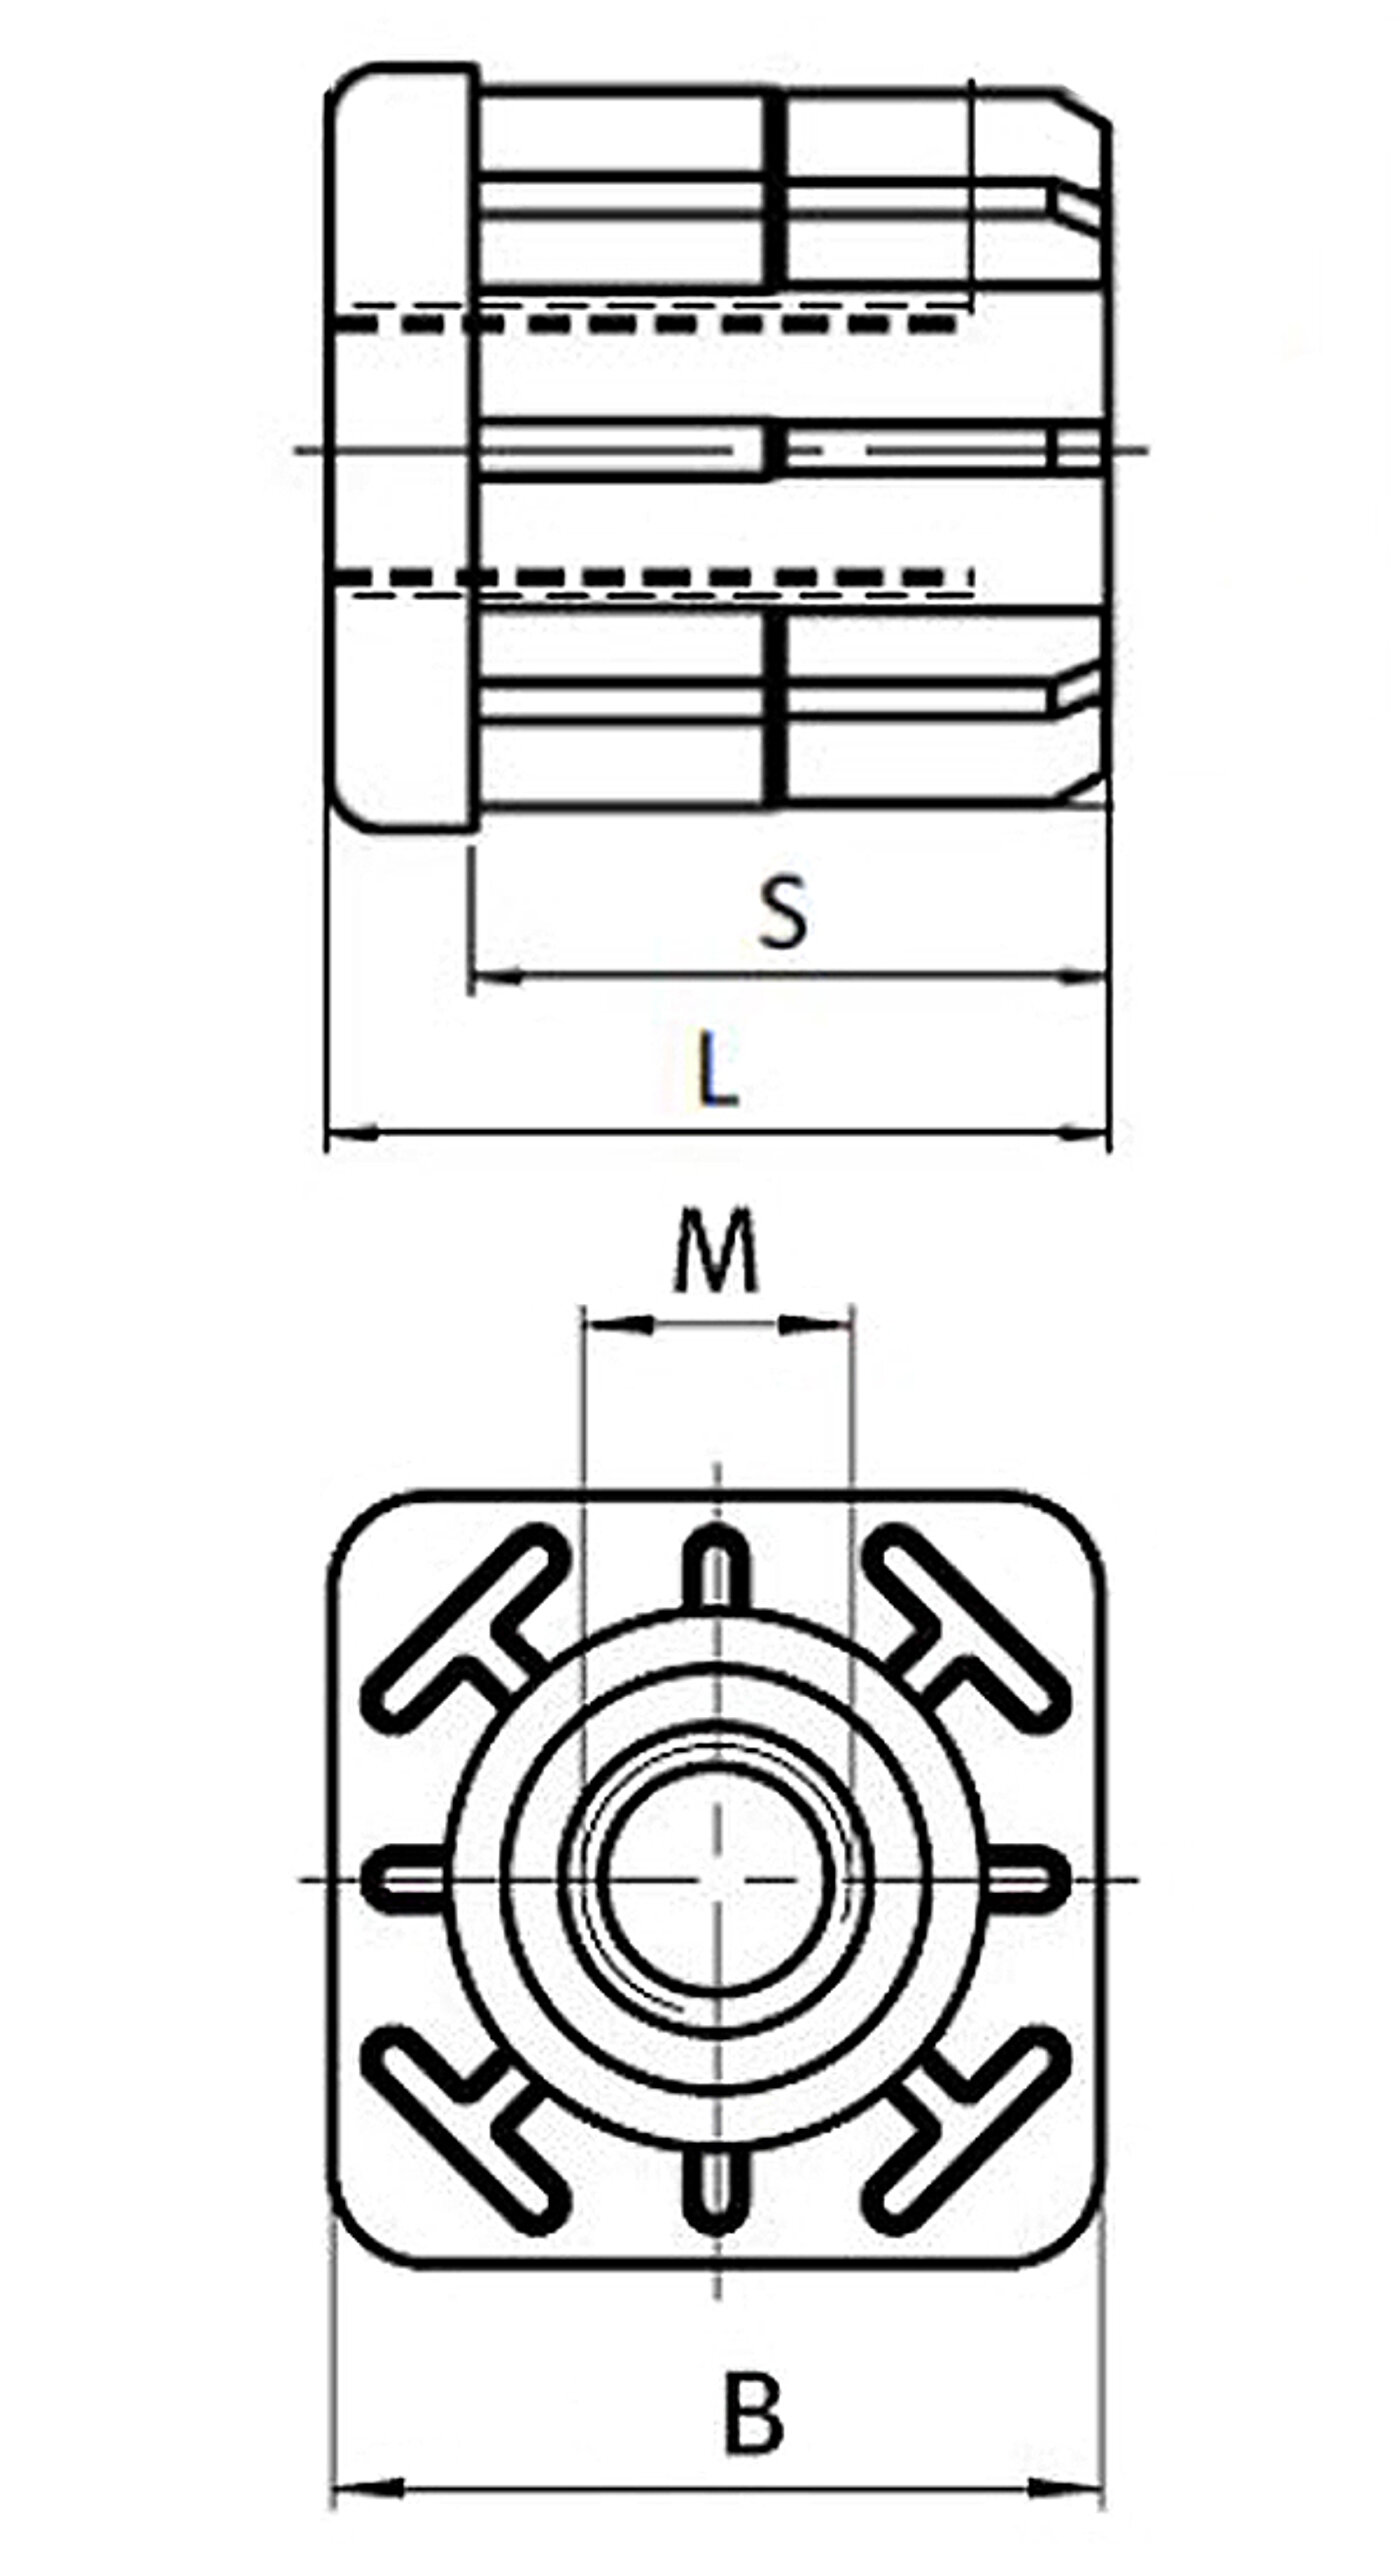 schematic drawing of a cubic threaded tube insert made of polyamide, with a centered inner thread, for press-fitting into square tube ends, isolated on white background